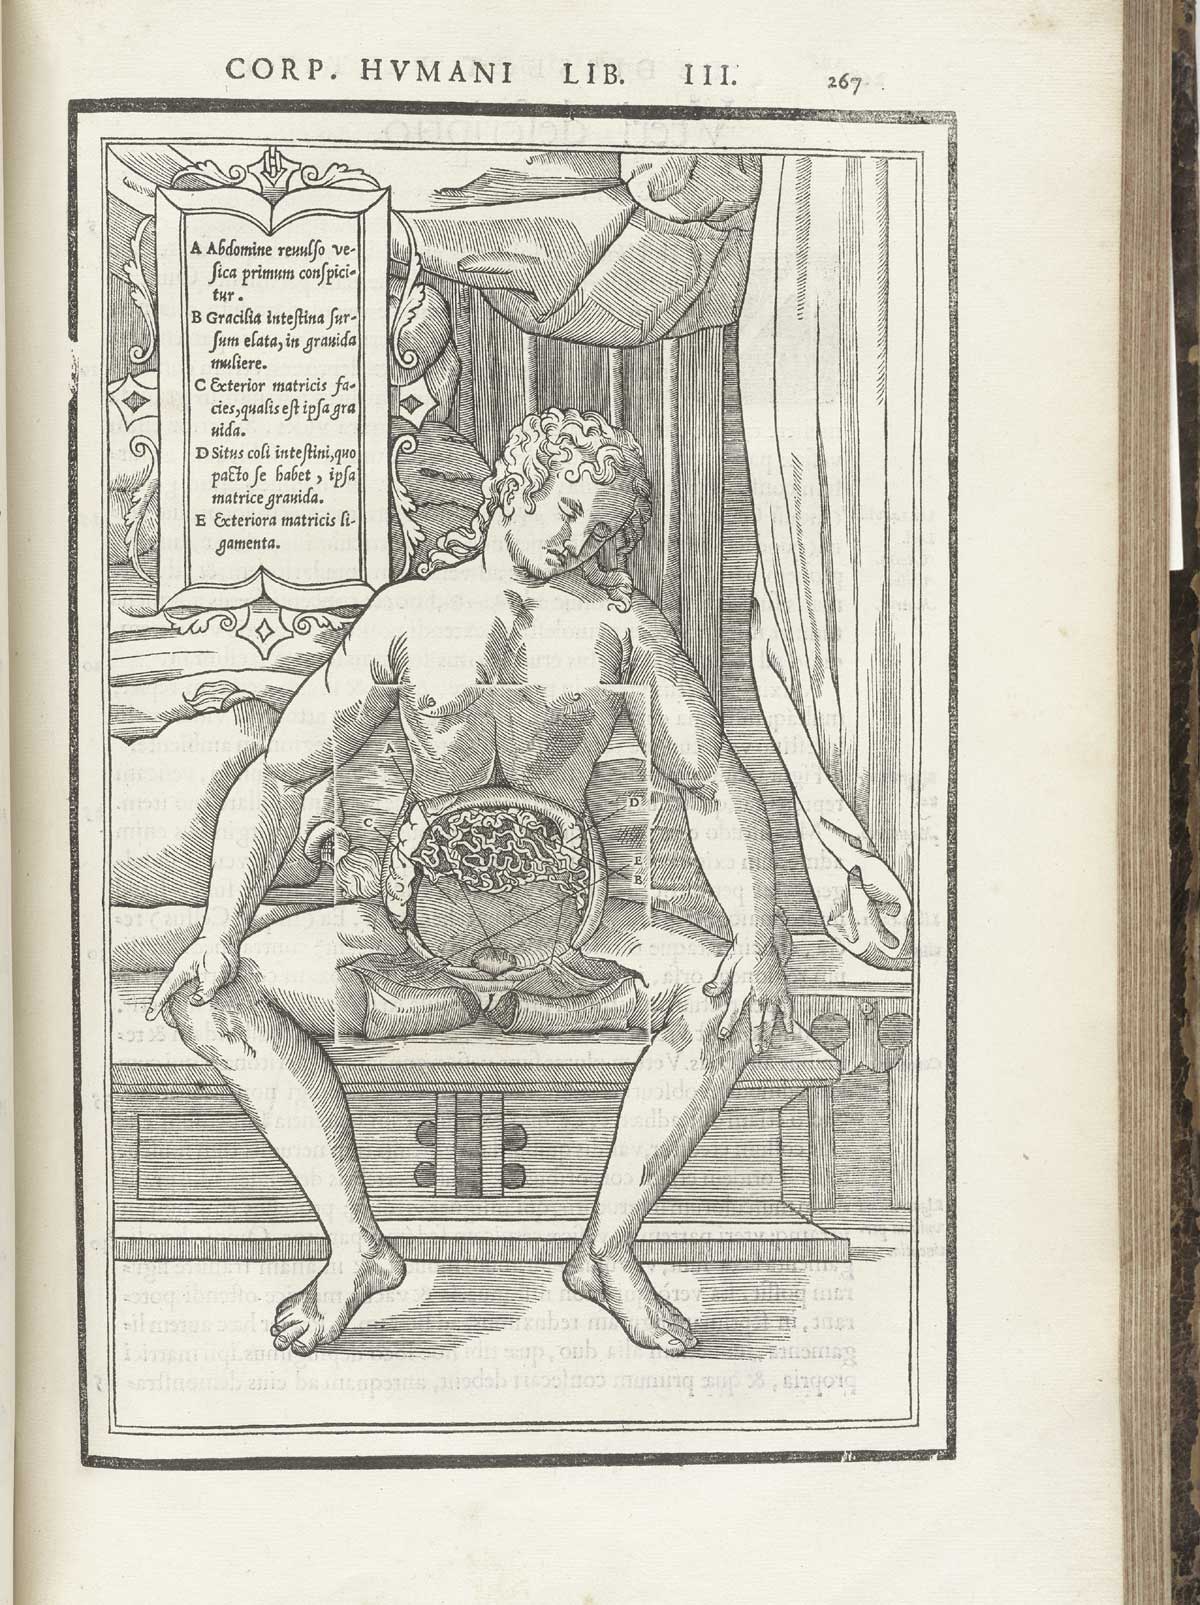 Woodcut of a facing pregnant female figure seated on the cabinet at the end of a bed with layers of flesh removed from the abdomen to reveal the uterus and other internal reproductive organs; the woman has long flowing hair and is facing the viewer with legs spread open and hand on her knees; a tablet giving text in Latin about the indicated body parts hangs above and to the left of the figure; from Charles Estienne’s De dissection partium corporis humani libri tres, NLM Call no.: WZ 240 E81dd 1545.